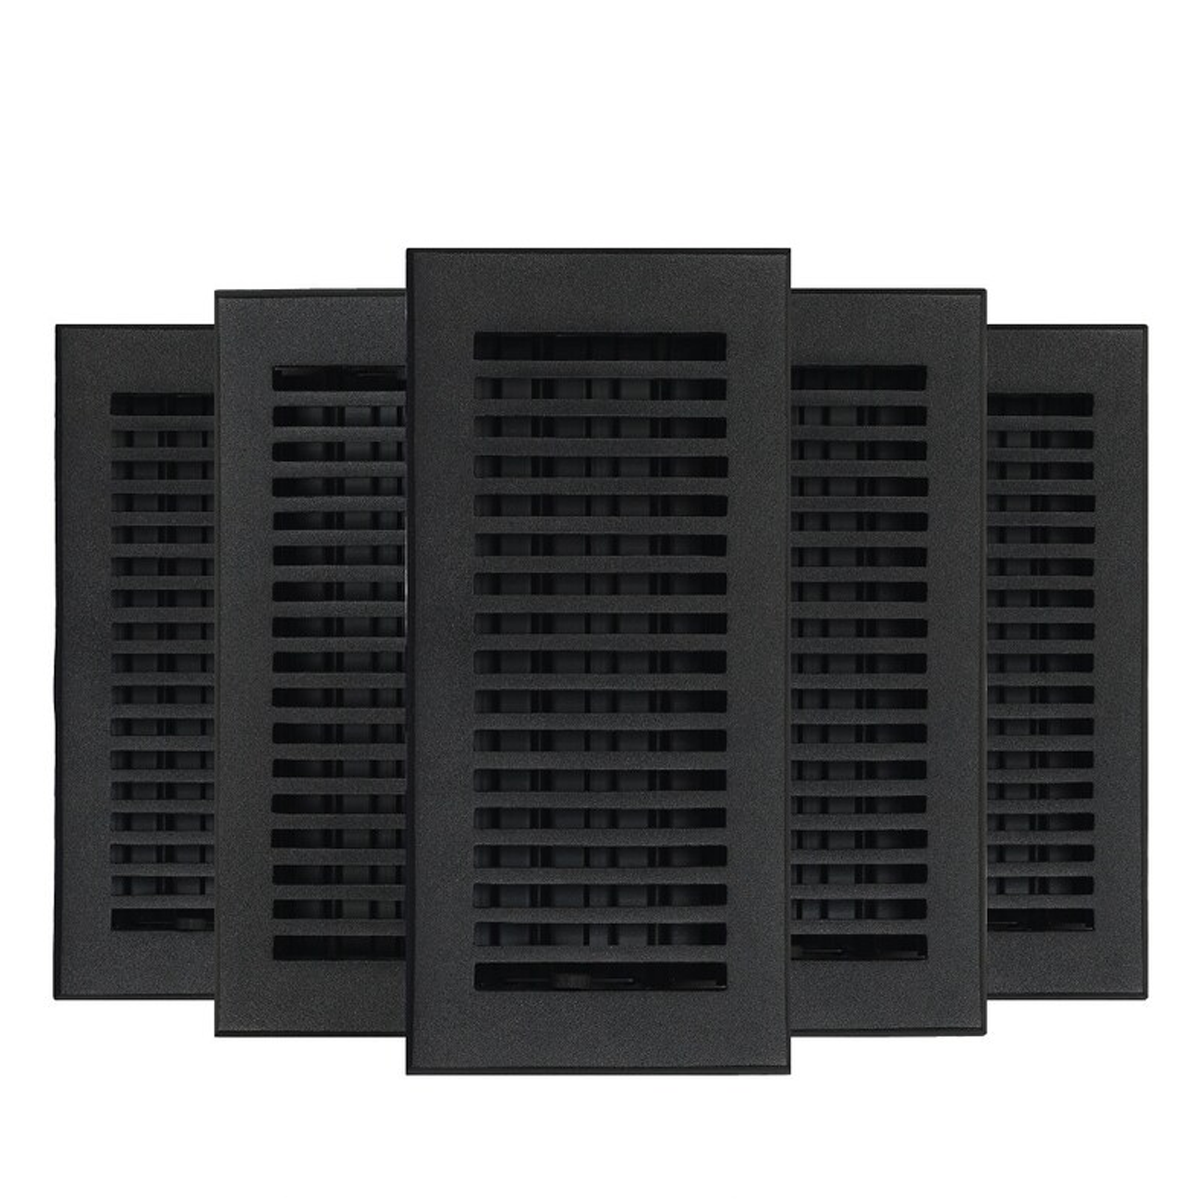 2 to 5 PACK 4"x10" SLEEK Walkable FLOOR Solid Cast Aluminum Air Supply louvered Powder Coated